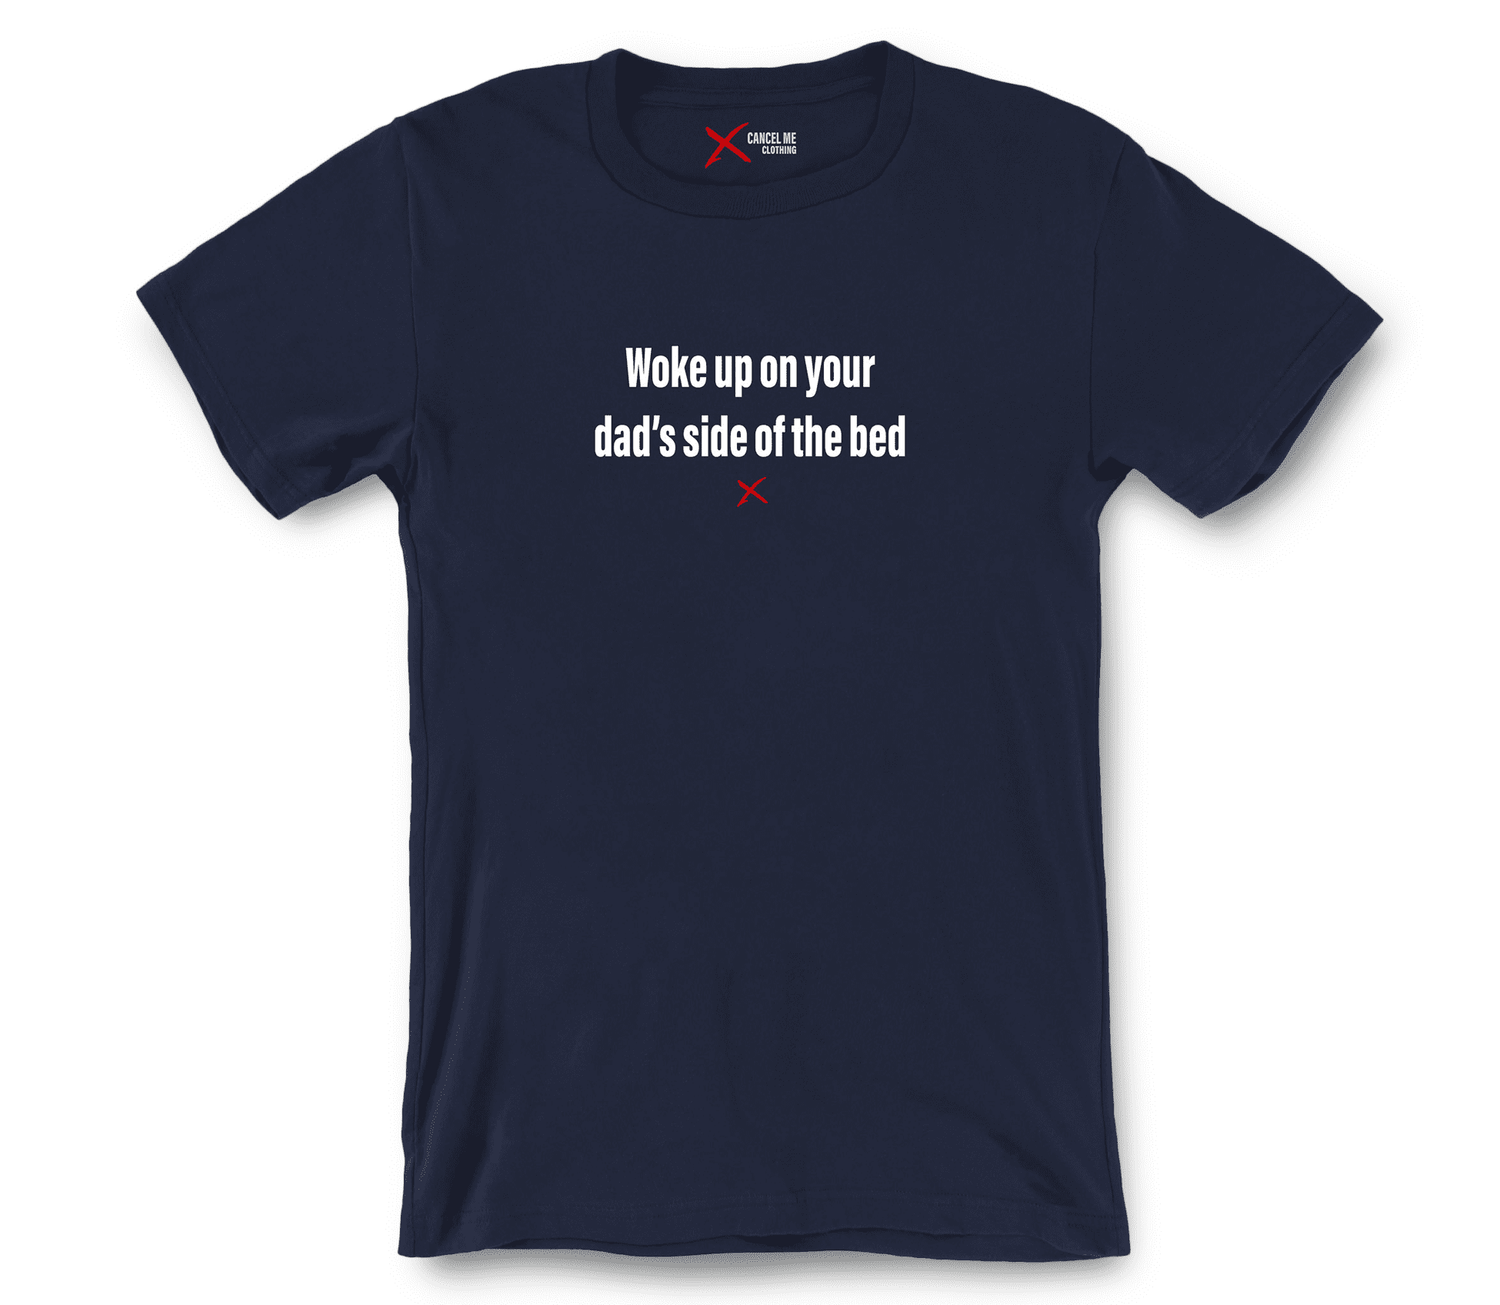 lp-sexual_5-shirt_7791575892138_woke-up-on-your-dads-side-of-the-bed-shirt_Navy.png